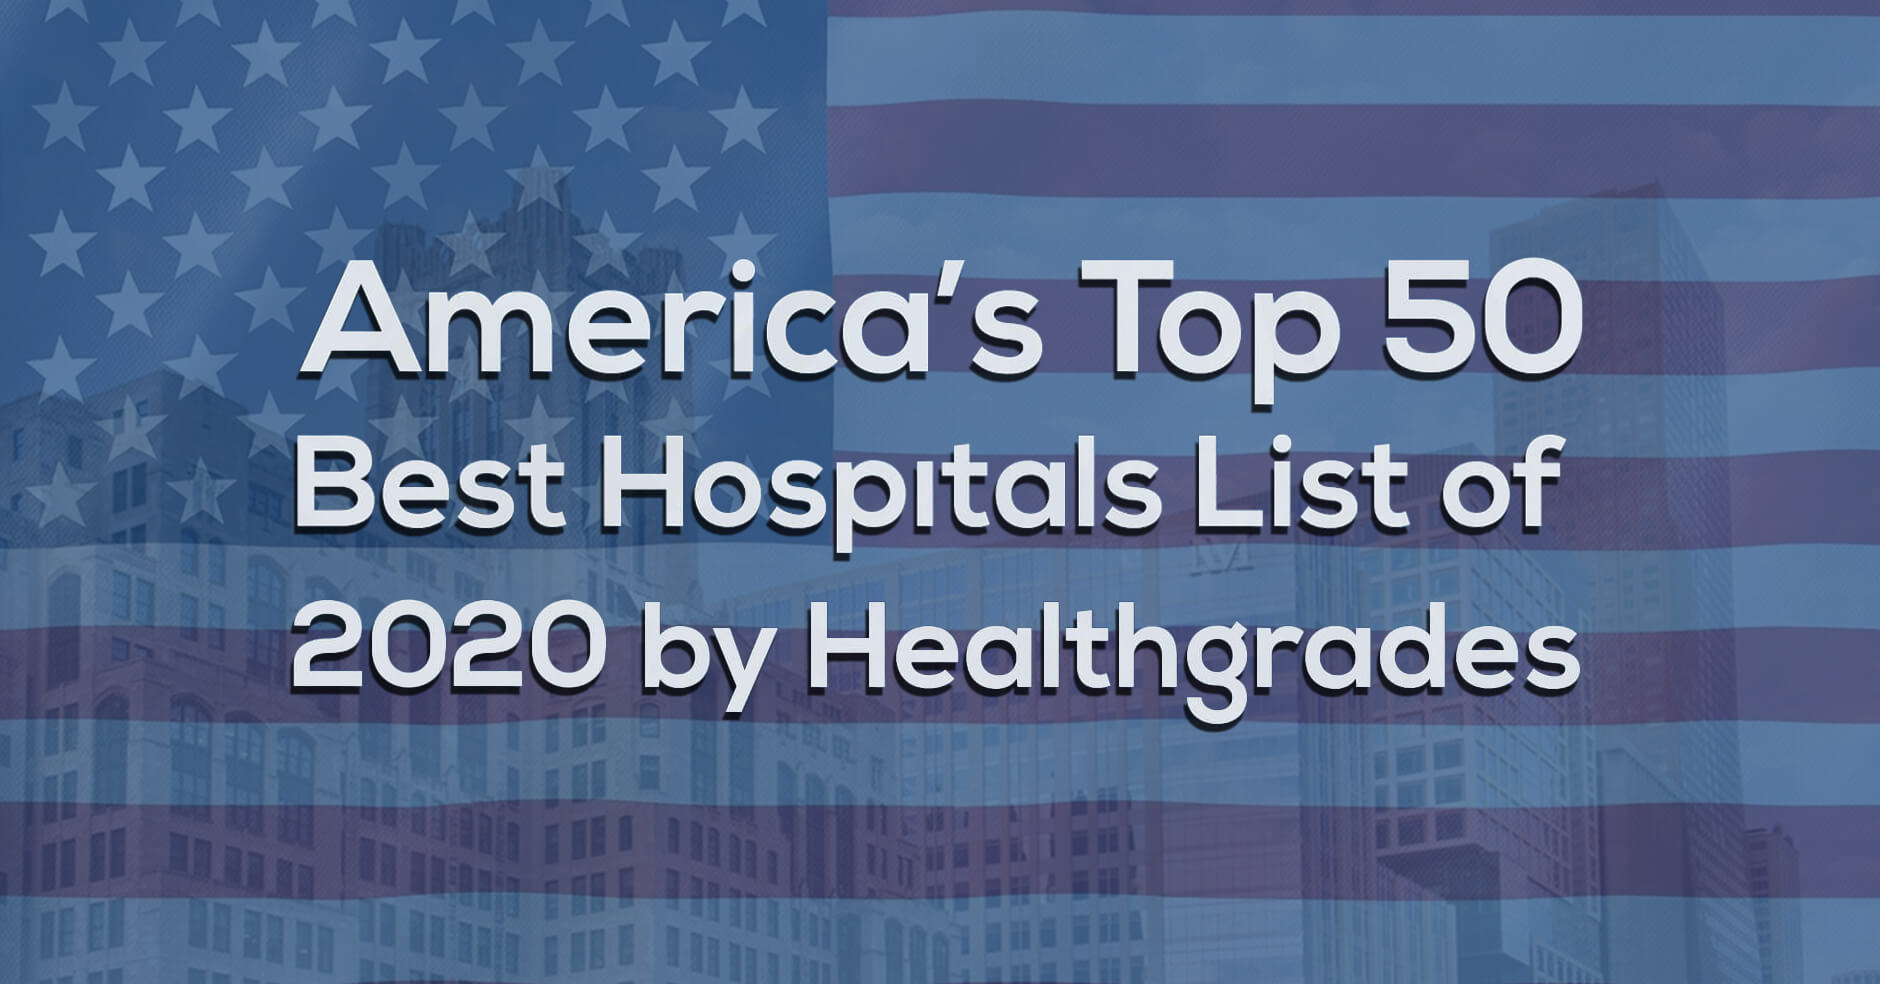 America’s Top 50 Best Hospitals List of 2020 by Healthgrades